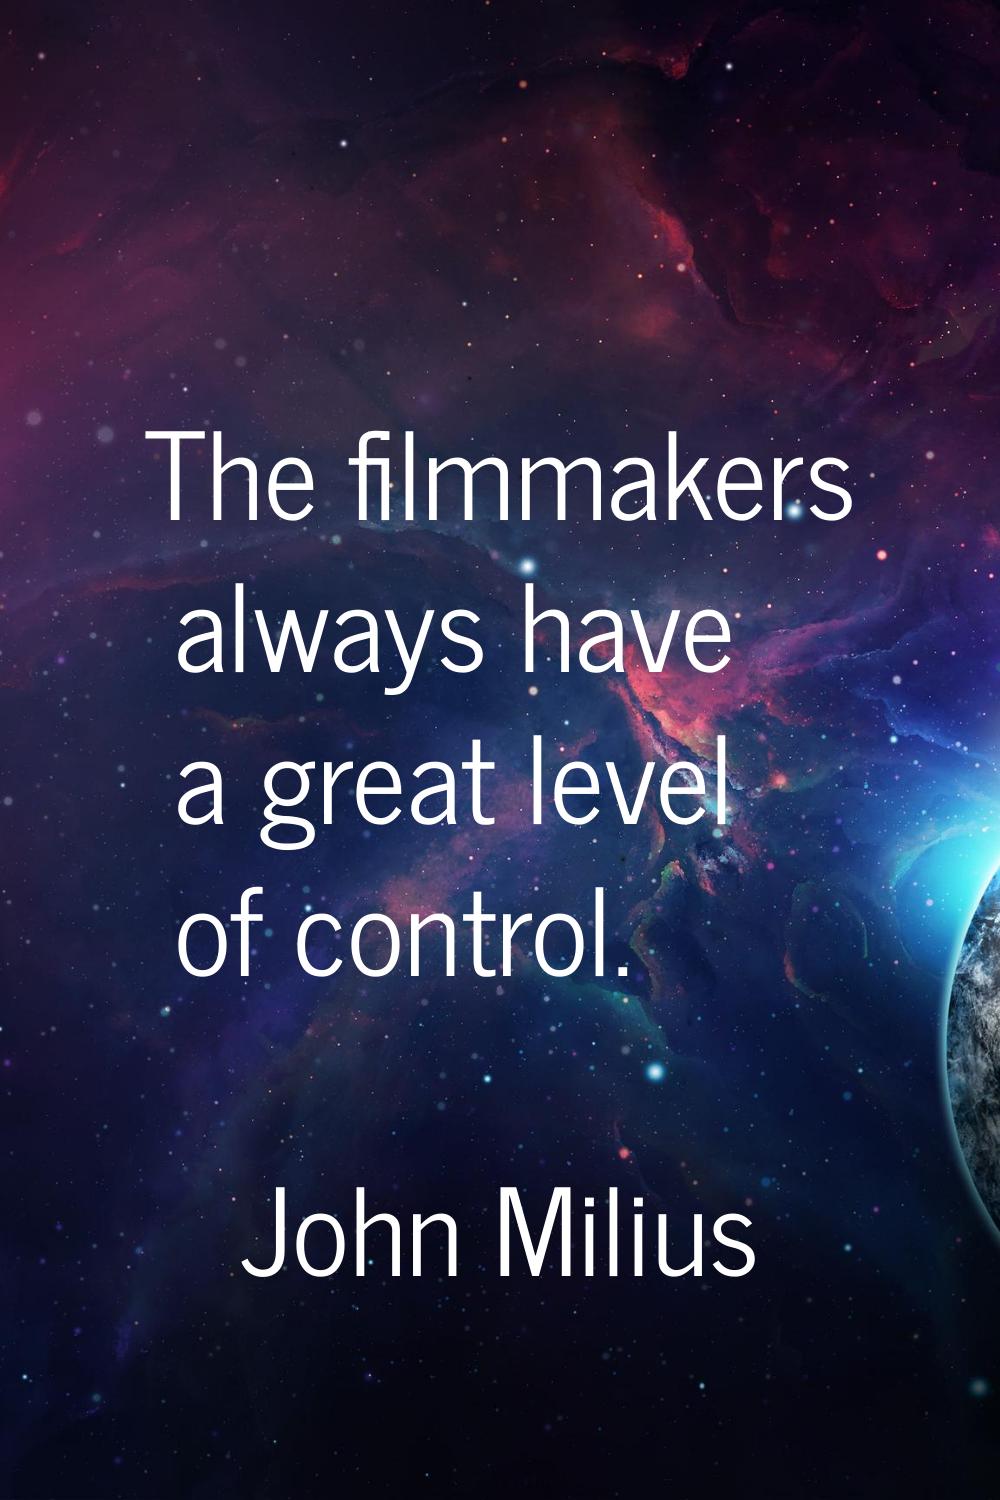 The filmmakers always have a great level of control.